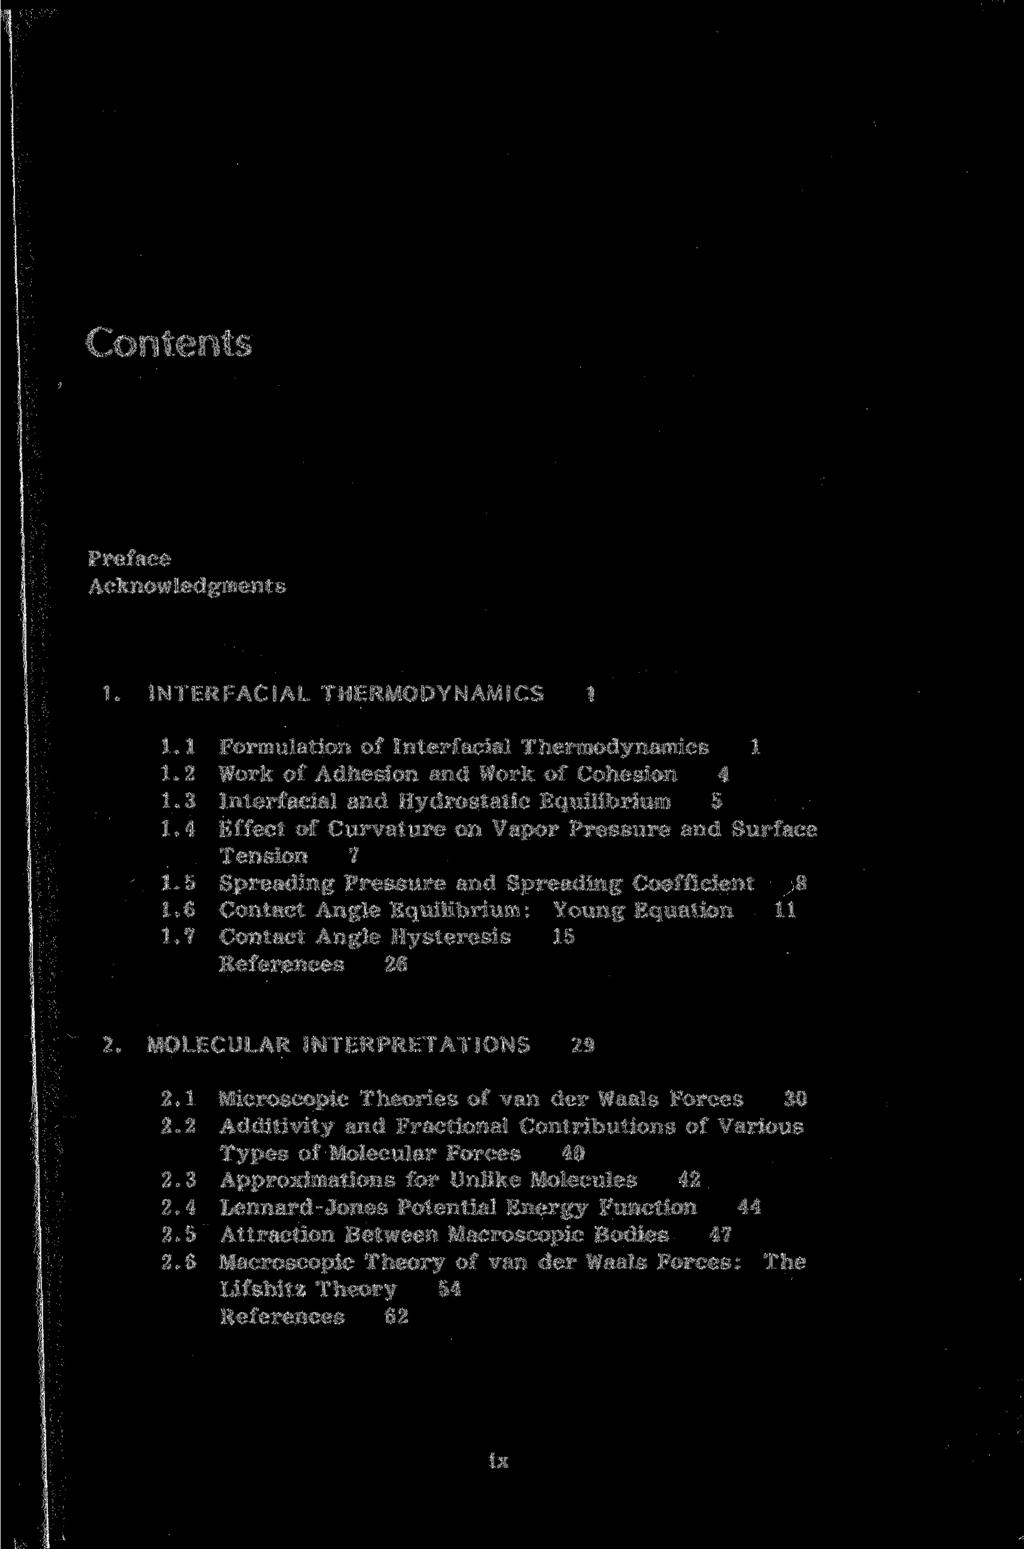 Preface Acknowledgments 1. INTERFACIAL THERMODYNAMICS 1 1.1 Formulation of Interfacial Thermodynamics 1 1.2 Work of Adhesion and Work of Cohesion 4 1.3 Interfacial and Hydrostatic Equilibrium 5 1.